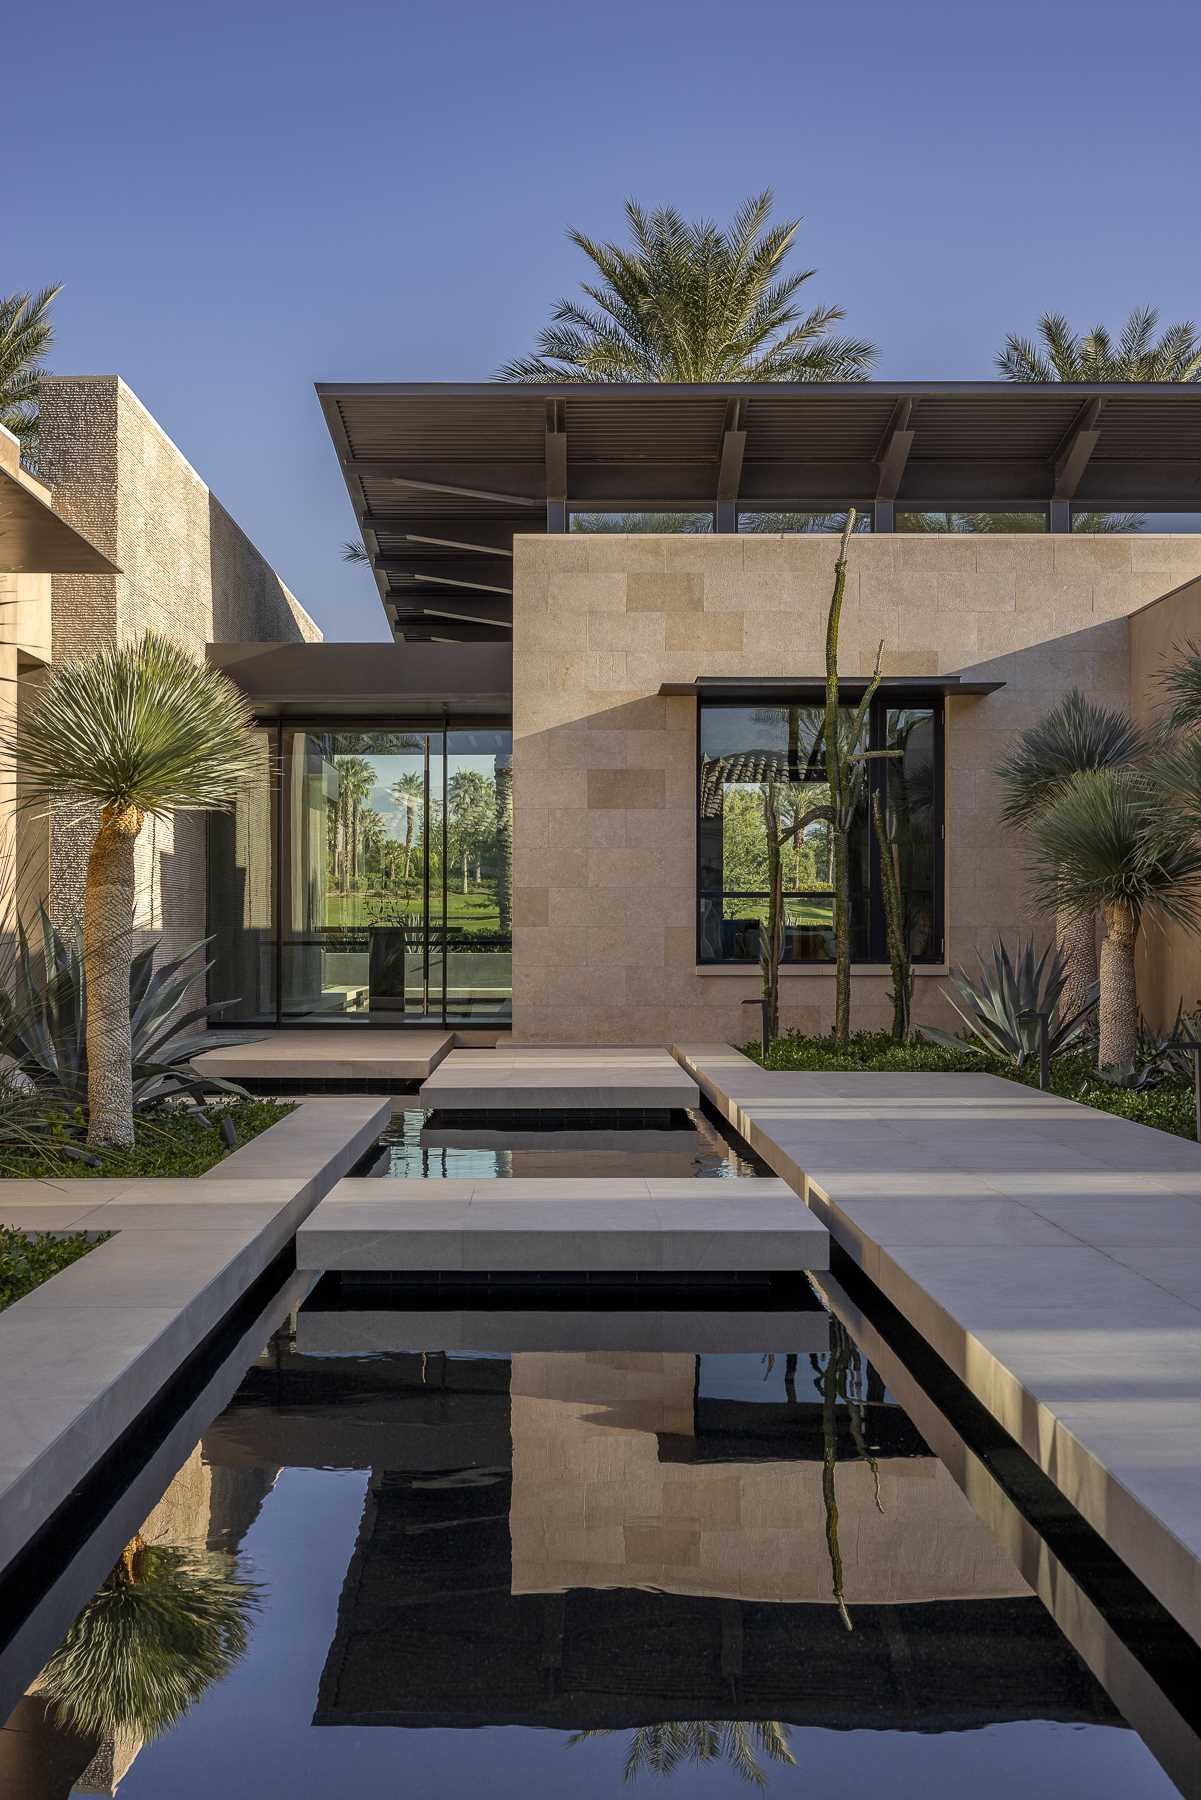 Upon arrival at the home, there's a carefully crafted entry path, navigating stairs and reflective ponds before crossing water via concrete lily pads to reach the entrance.